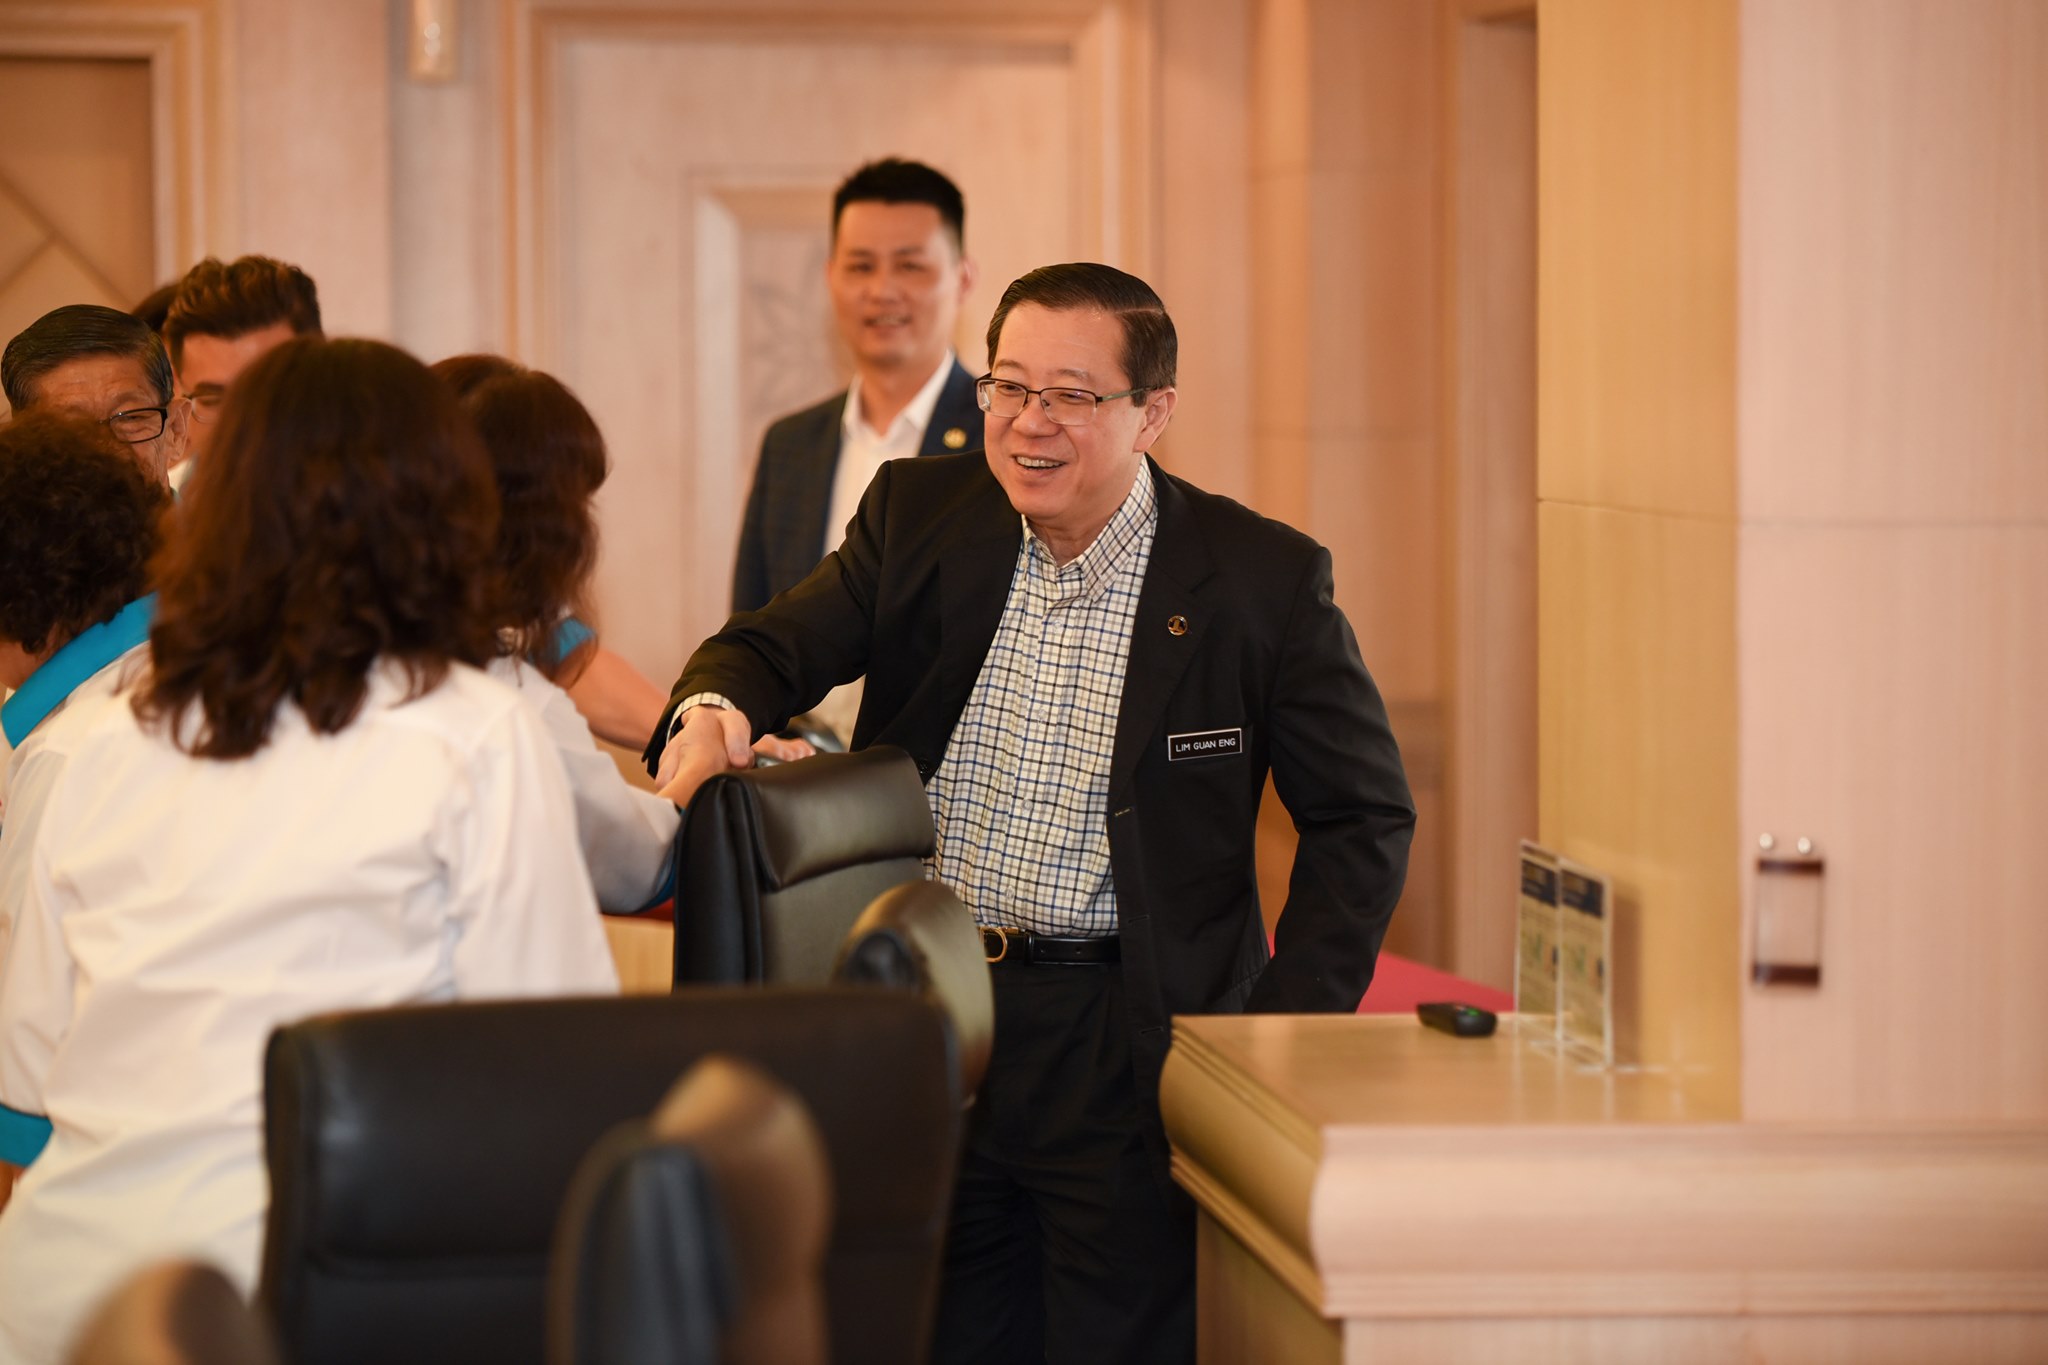 Lim Guan Eng greets passers-by at an event in February. Photo: Lim Guan Eng /Facebook
